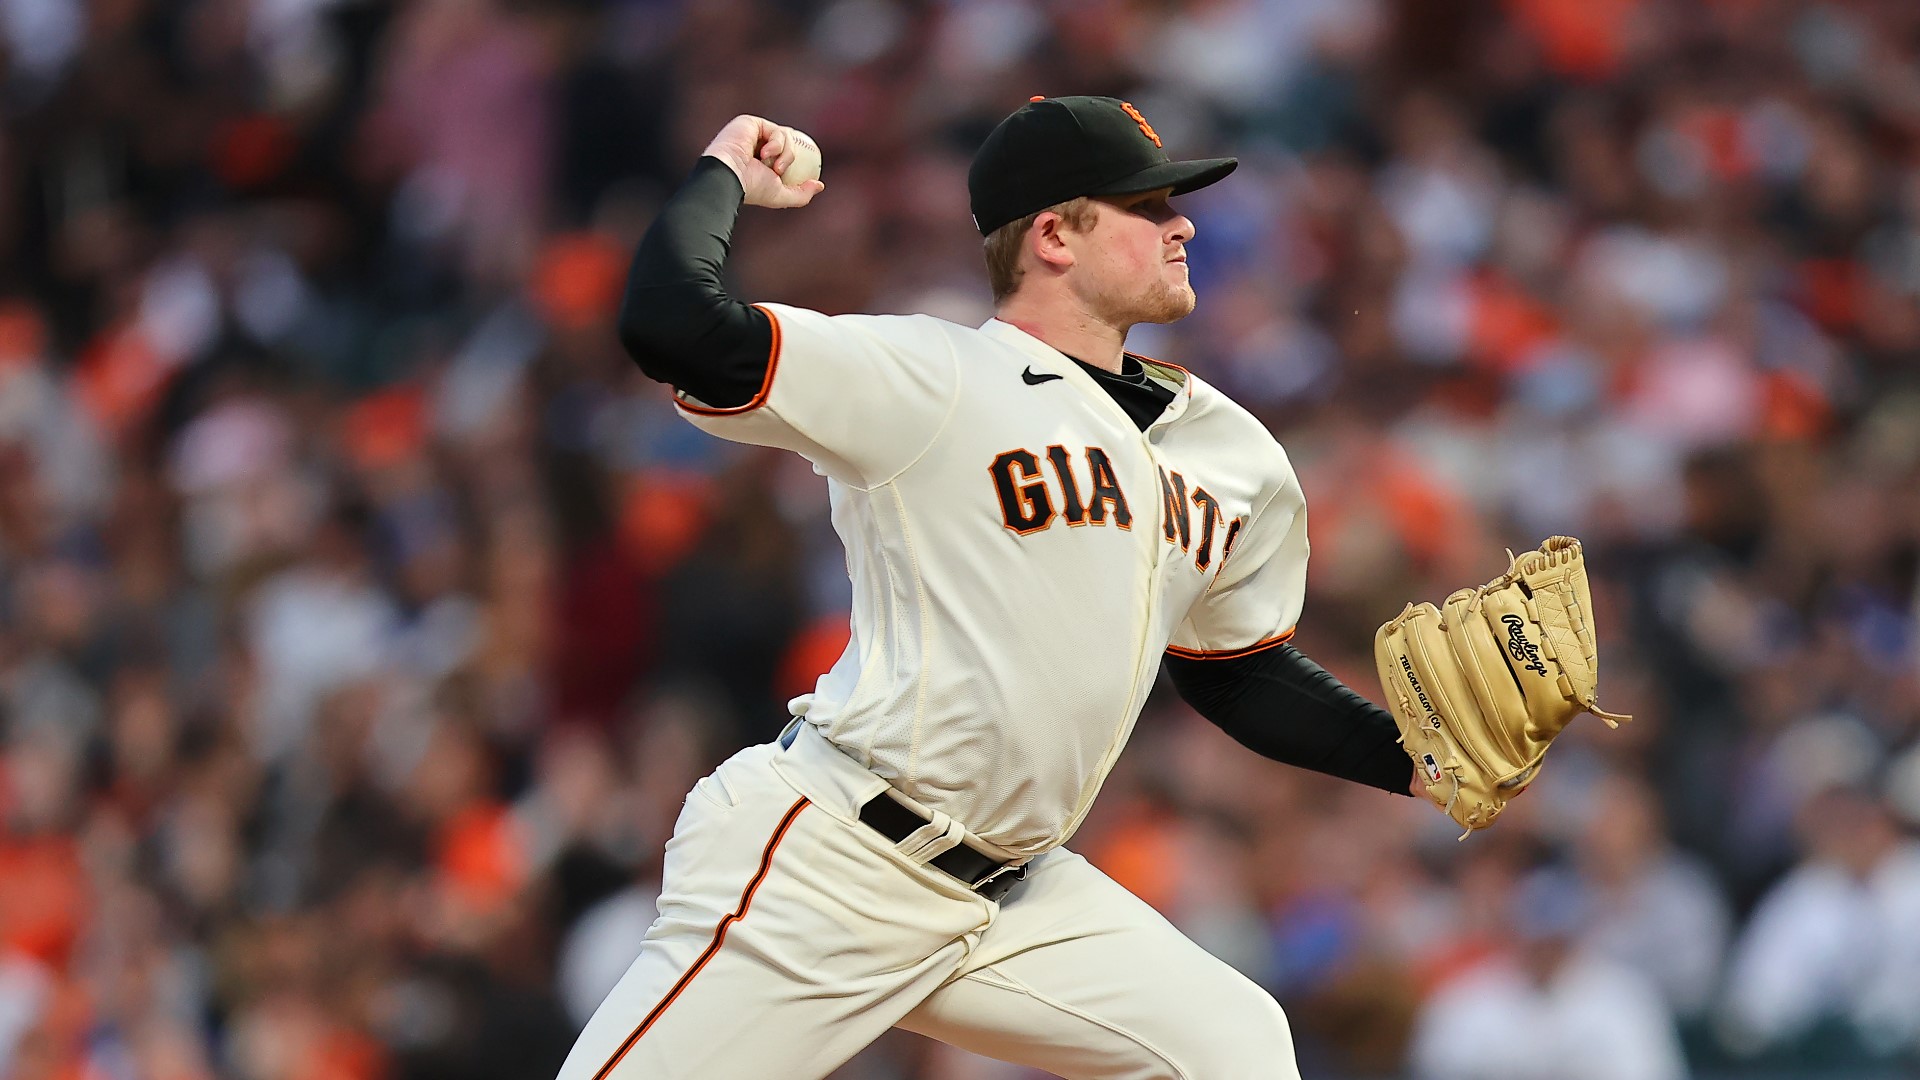 Giants starter Logan Webb previews his start for San Francisco in Game 5 of the National League Division series, the support from Rocklin & love of Red Bull.